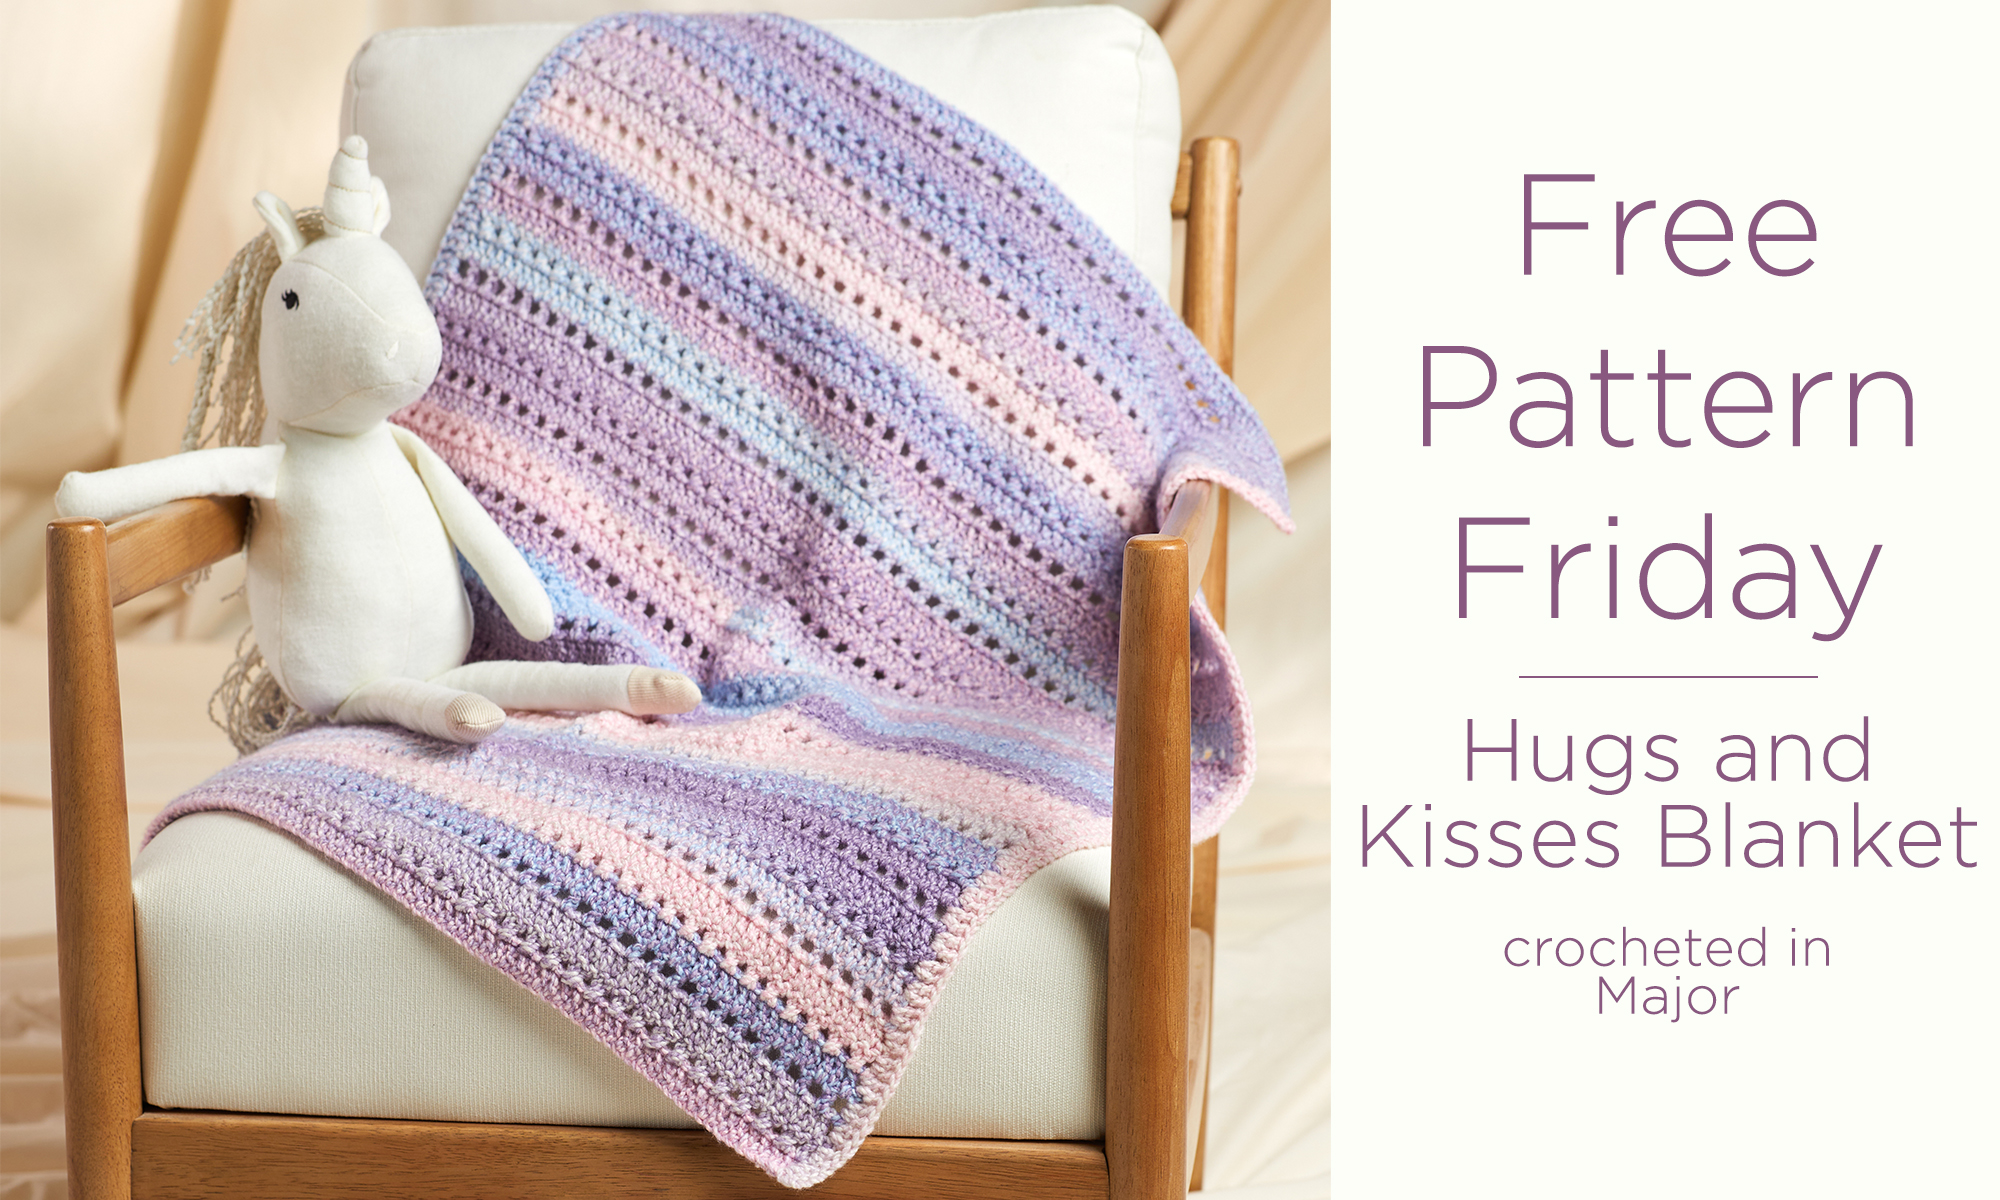 A crocheted blanket is draped on a chair with a stuffed unicorn sitting on top. Text reads "Free Pattern Friday. Hugs and Kisses Blanket, crocheted in Major."